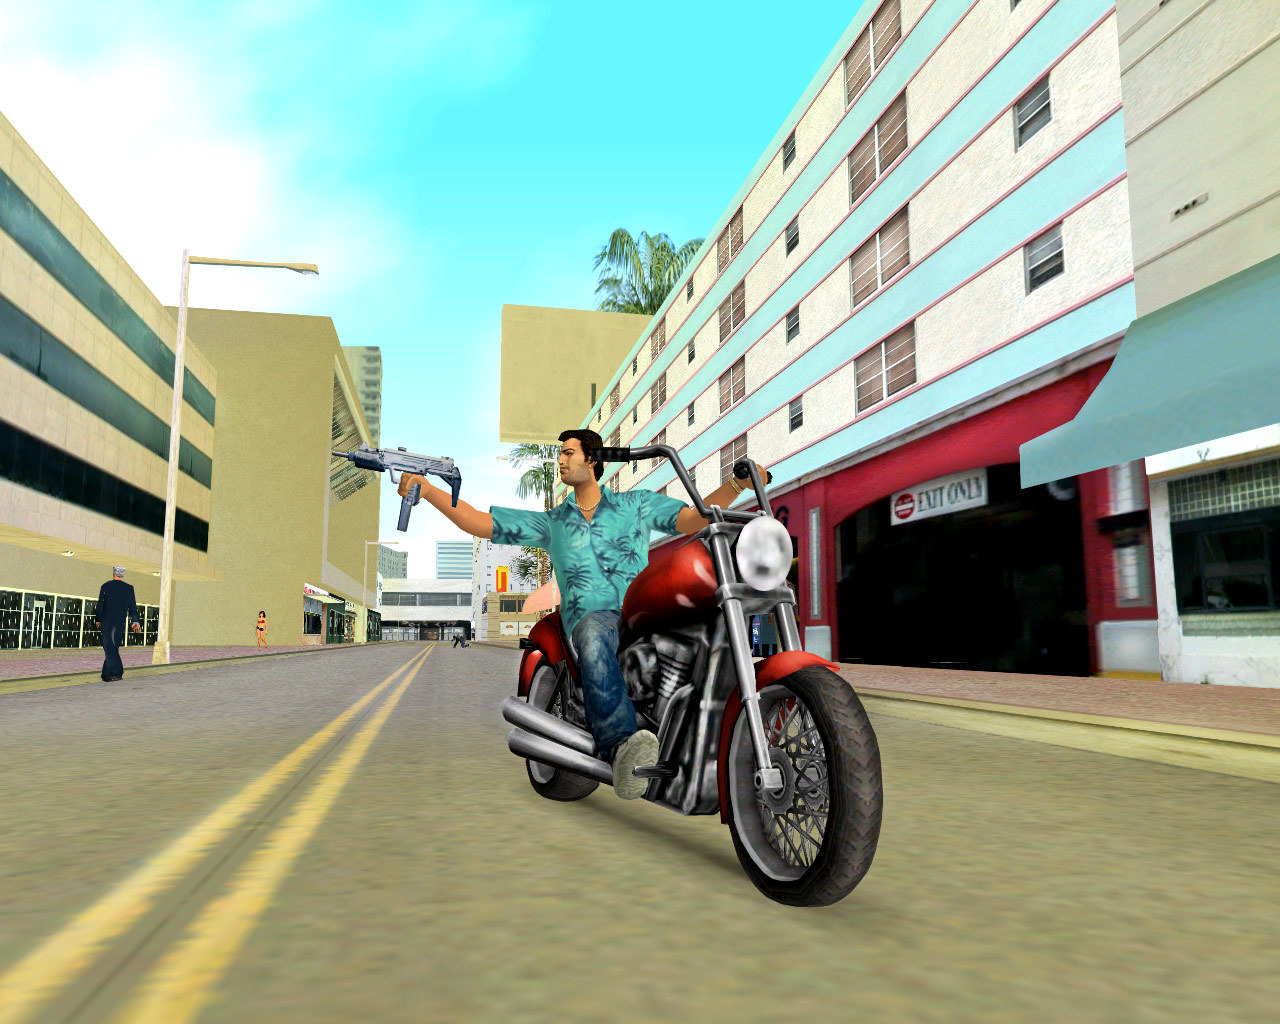 grand theft auto vice city game play